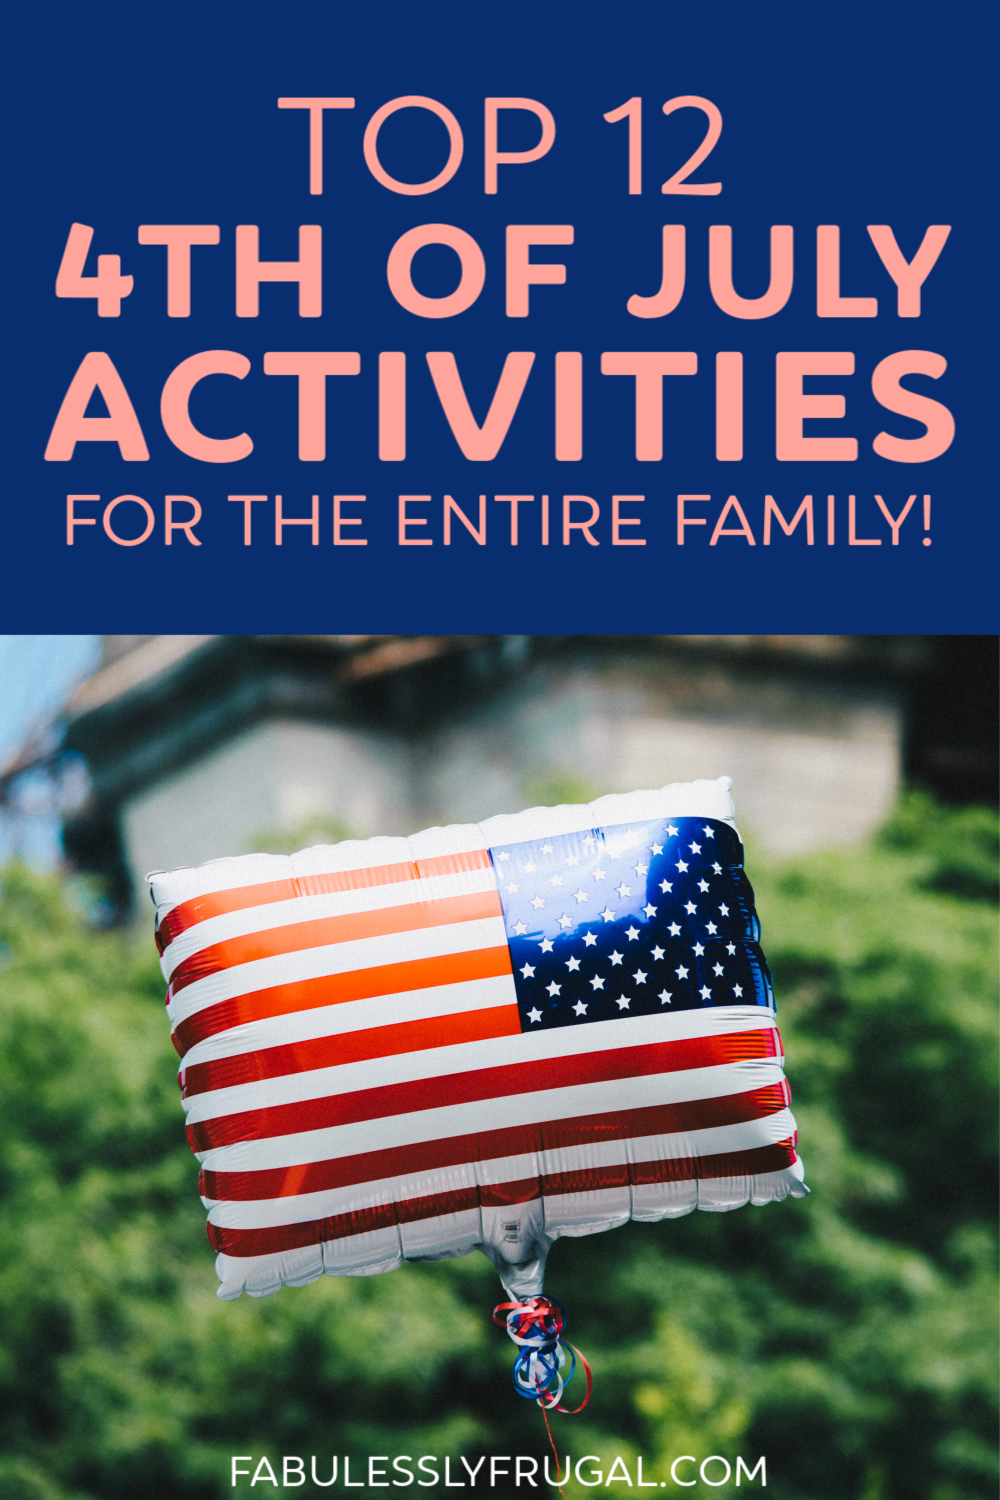 4th of July activities